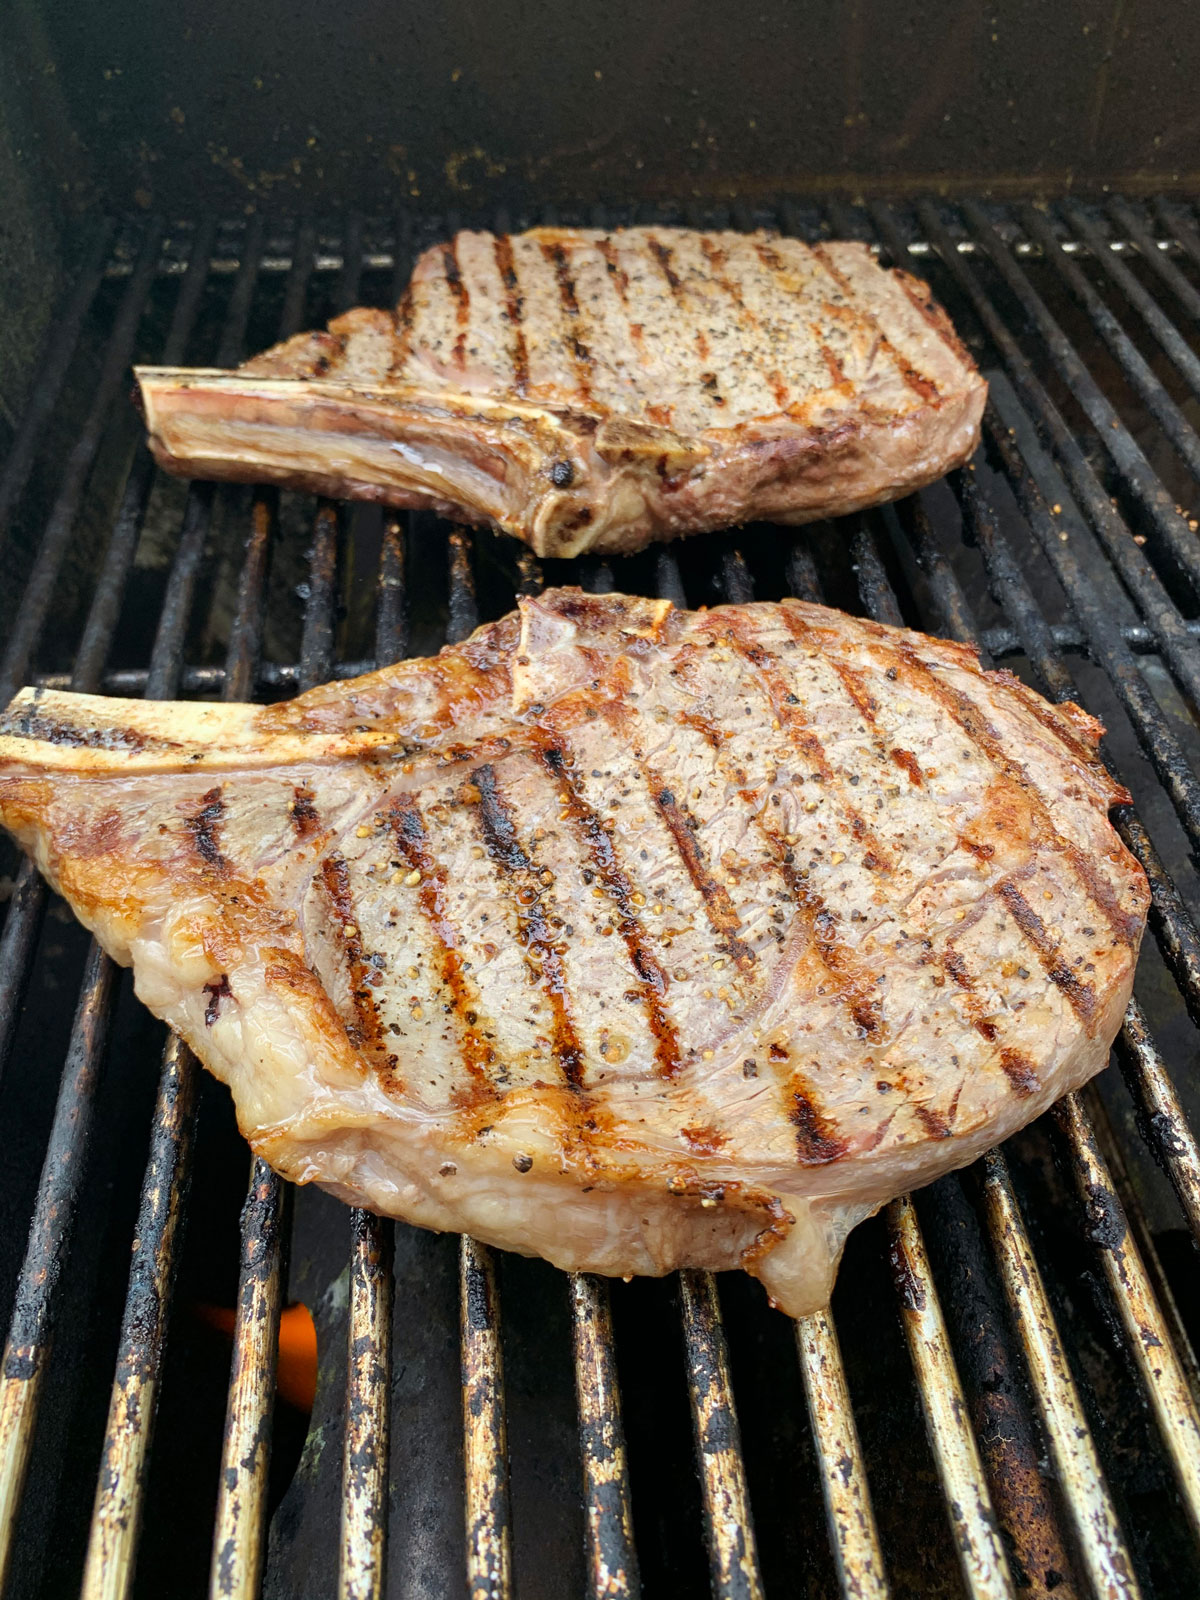 ribeye steak cooking on the grill